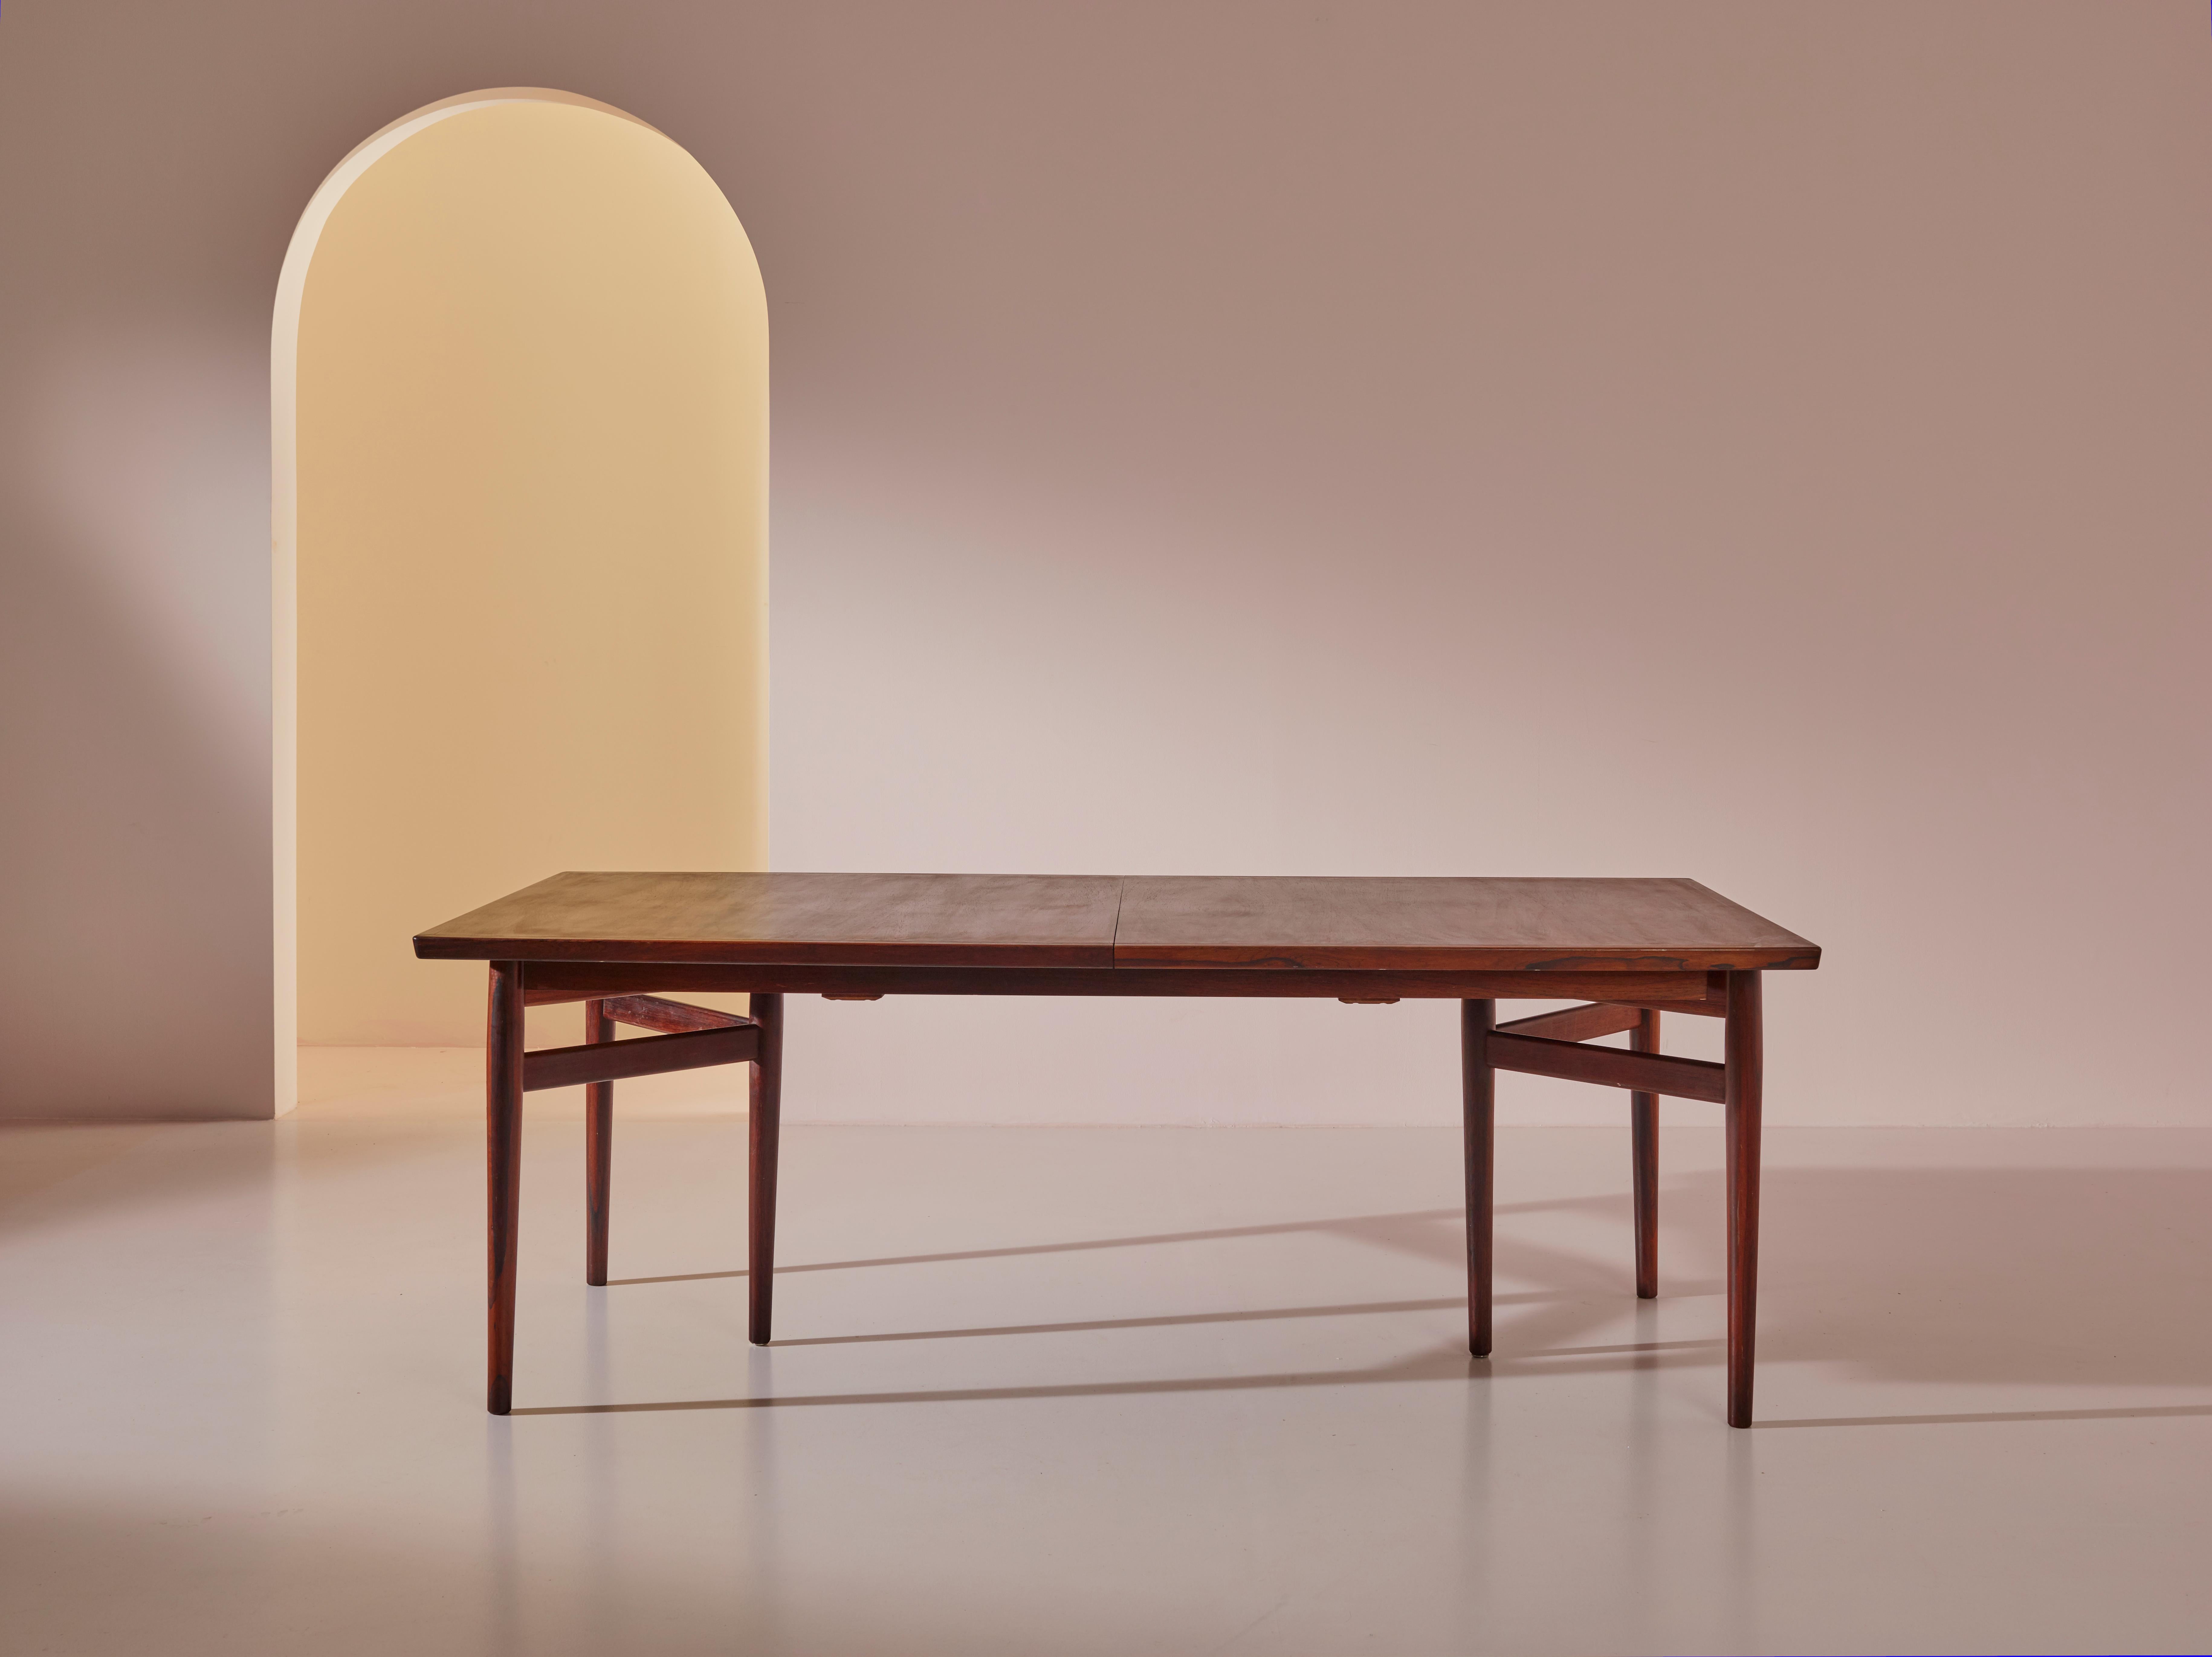 An elegant dining table, Model 201 by Arne Vodder for Sibast Møbelfabrik, Denmark, dating back to the 1960s. This refined table showcases a rectangular walnut top, supported by distinctive triangular bases. Meticulously restored and refinished, the